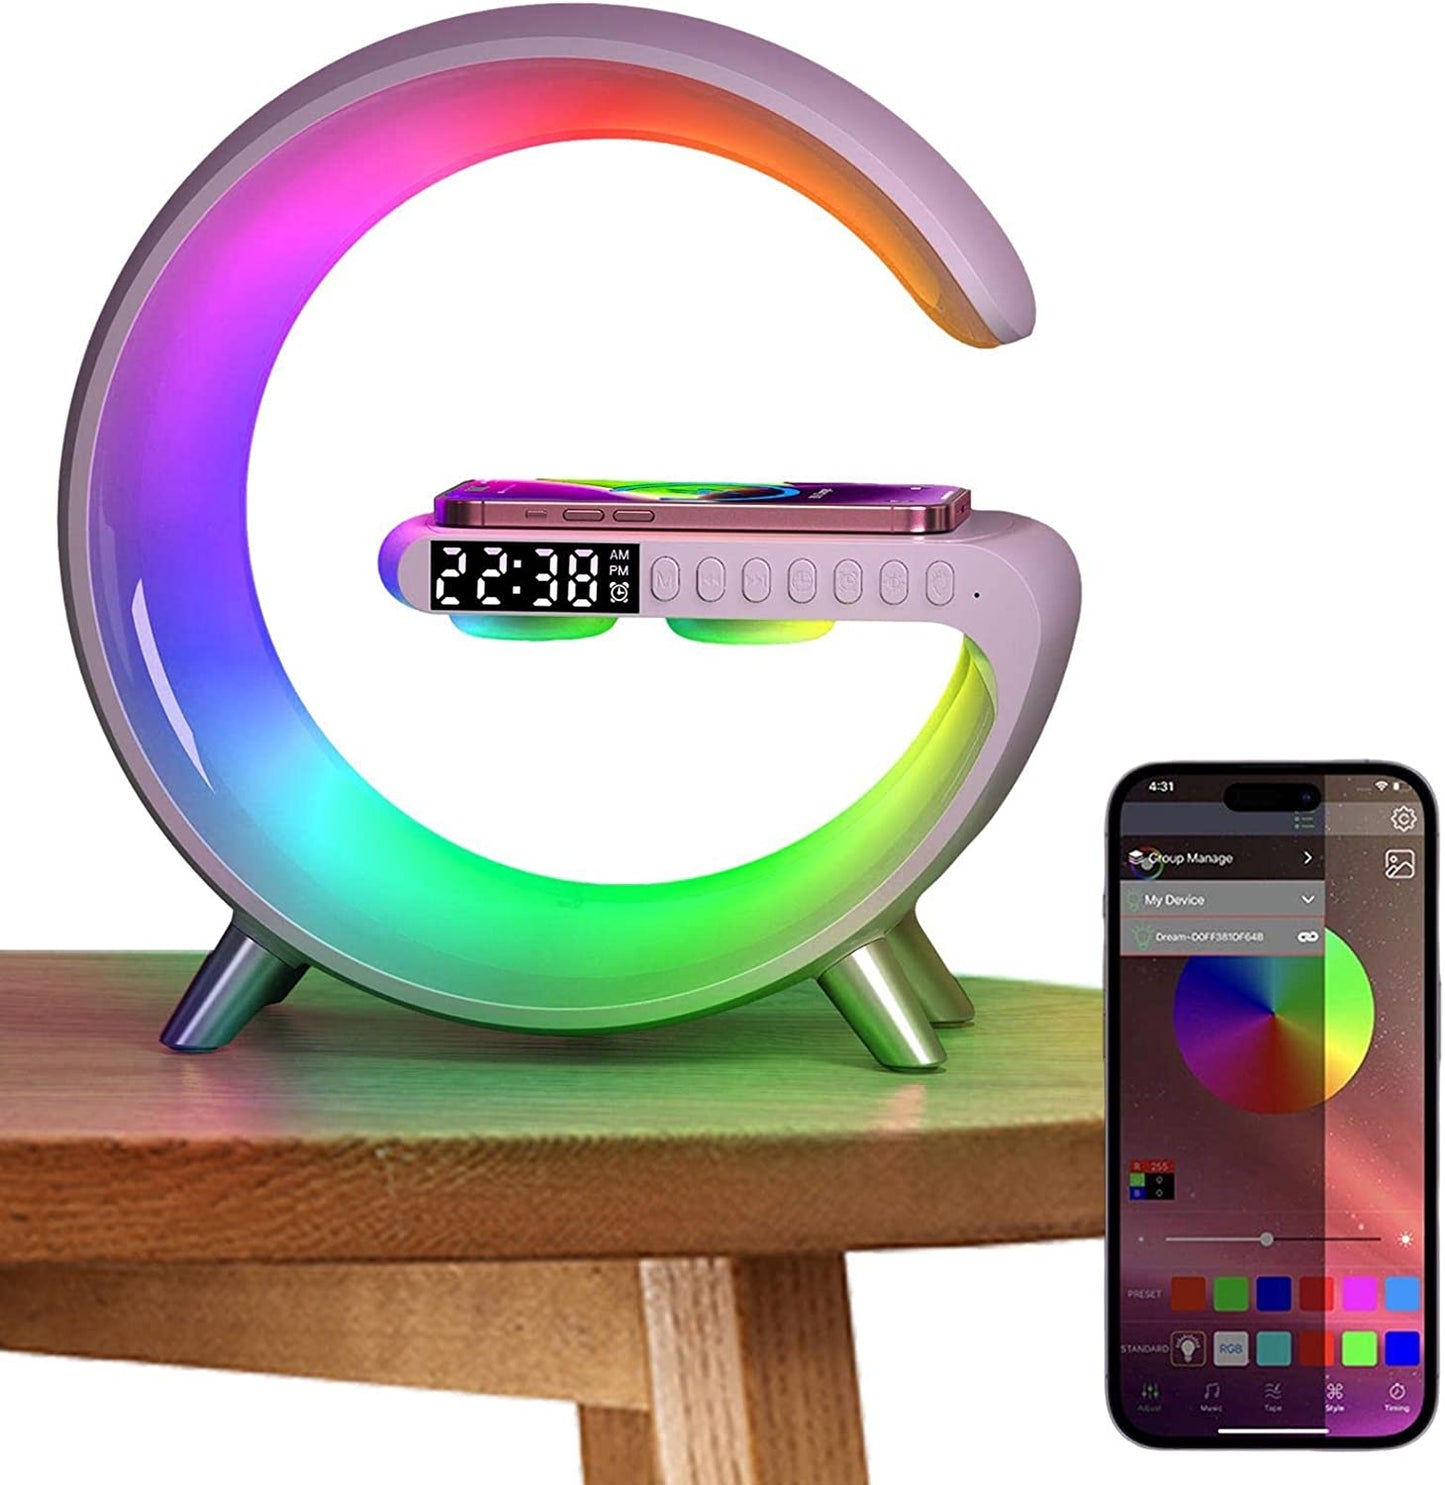 Rainbow Charger Lamp